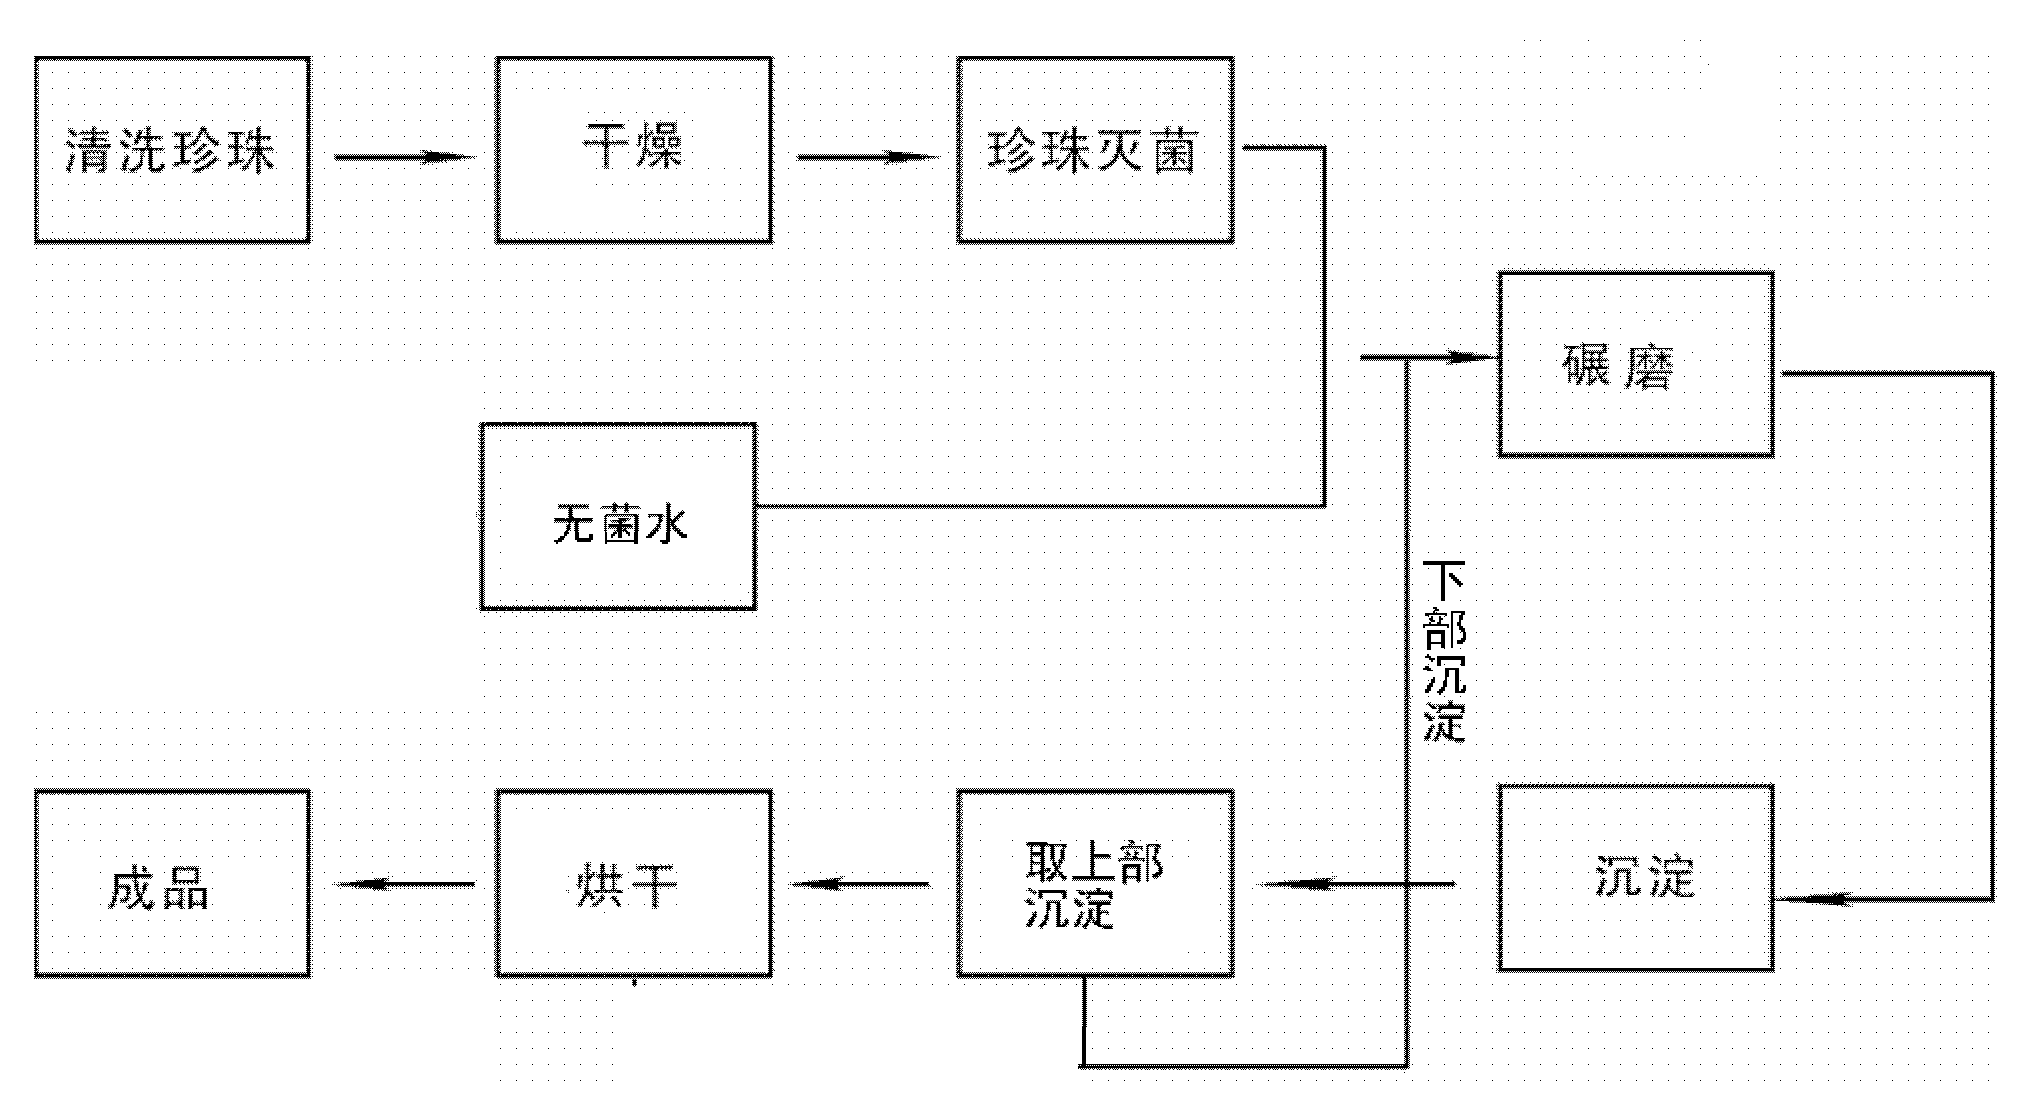 Method for producing pearl powder by porcelain ball rolling and water milling